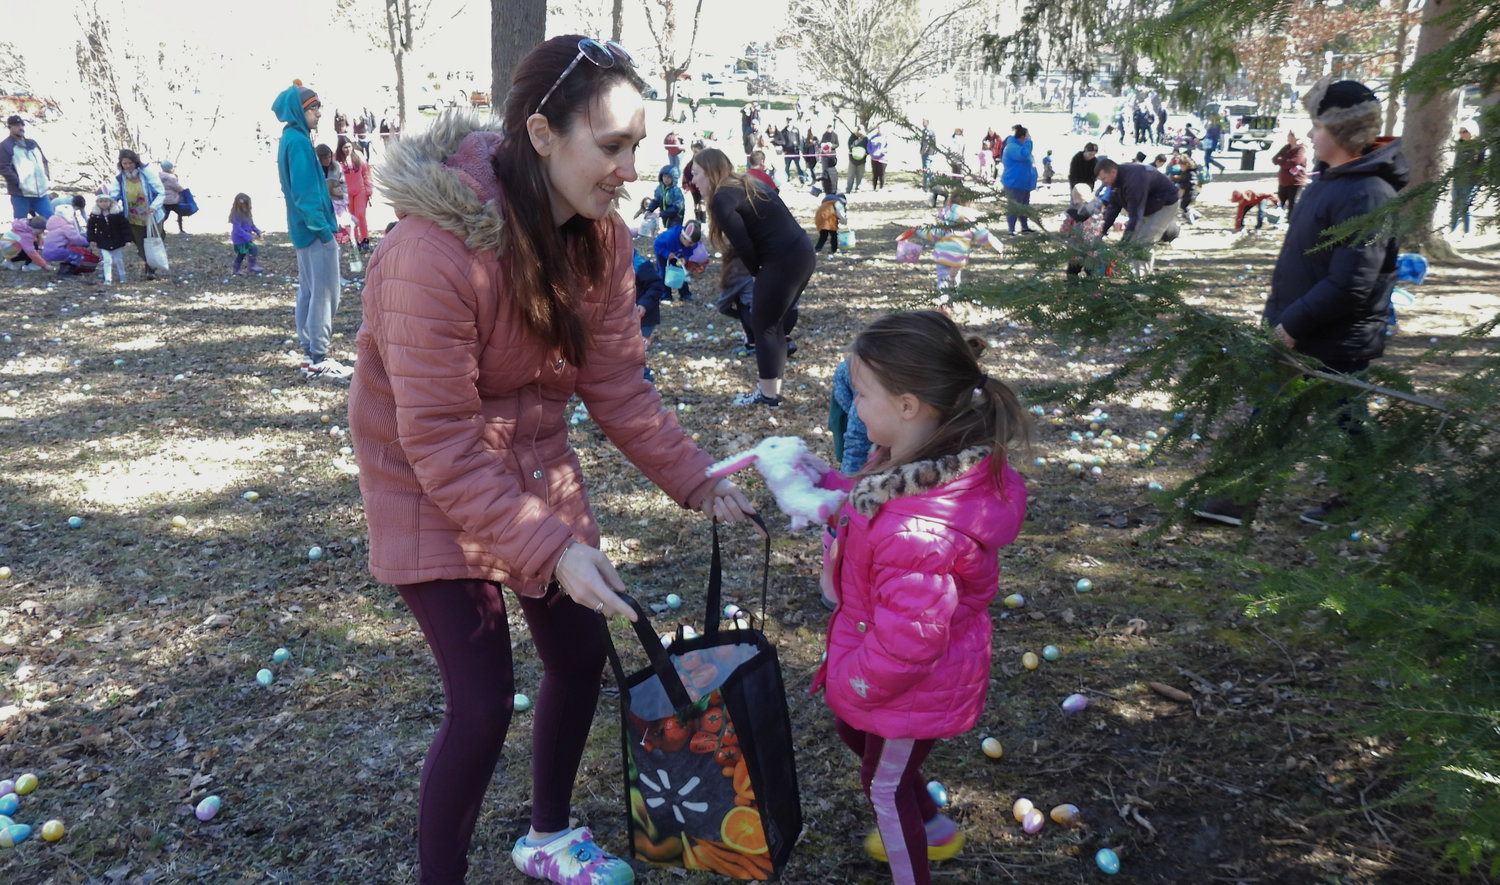 The annual Oneida Easter Egg Hunt saw kids of all ages in Allen Park filling their bags and baskets with eggs on Saturday, April 8 in Oneida. Pictured is Cindy Wilson, helping her five-year-old daughter Kairi collect one of the stuffed animals hidden in the park.